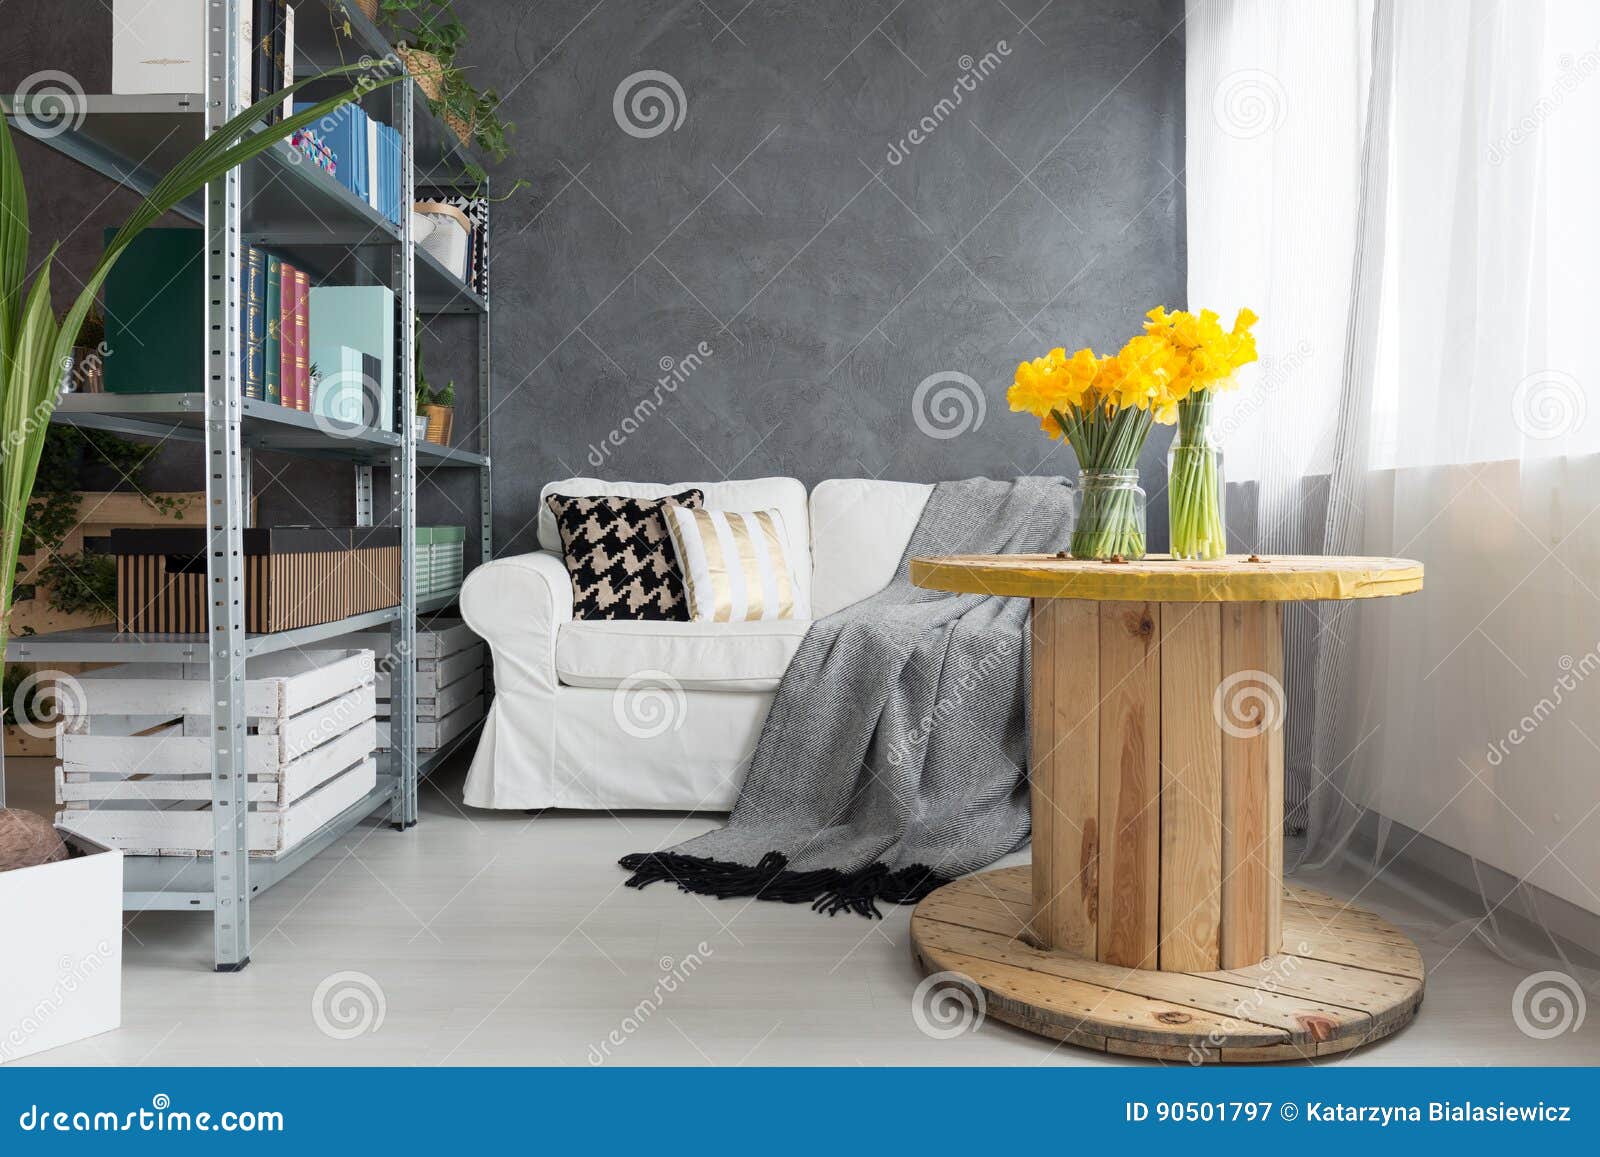 Living room with flowers stock image. Image of furniture - 90501797